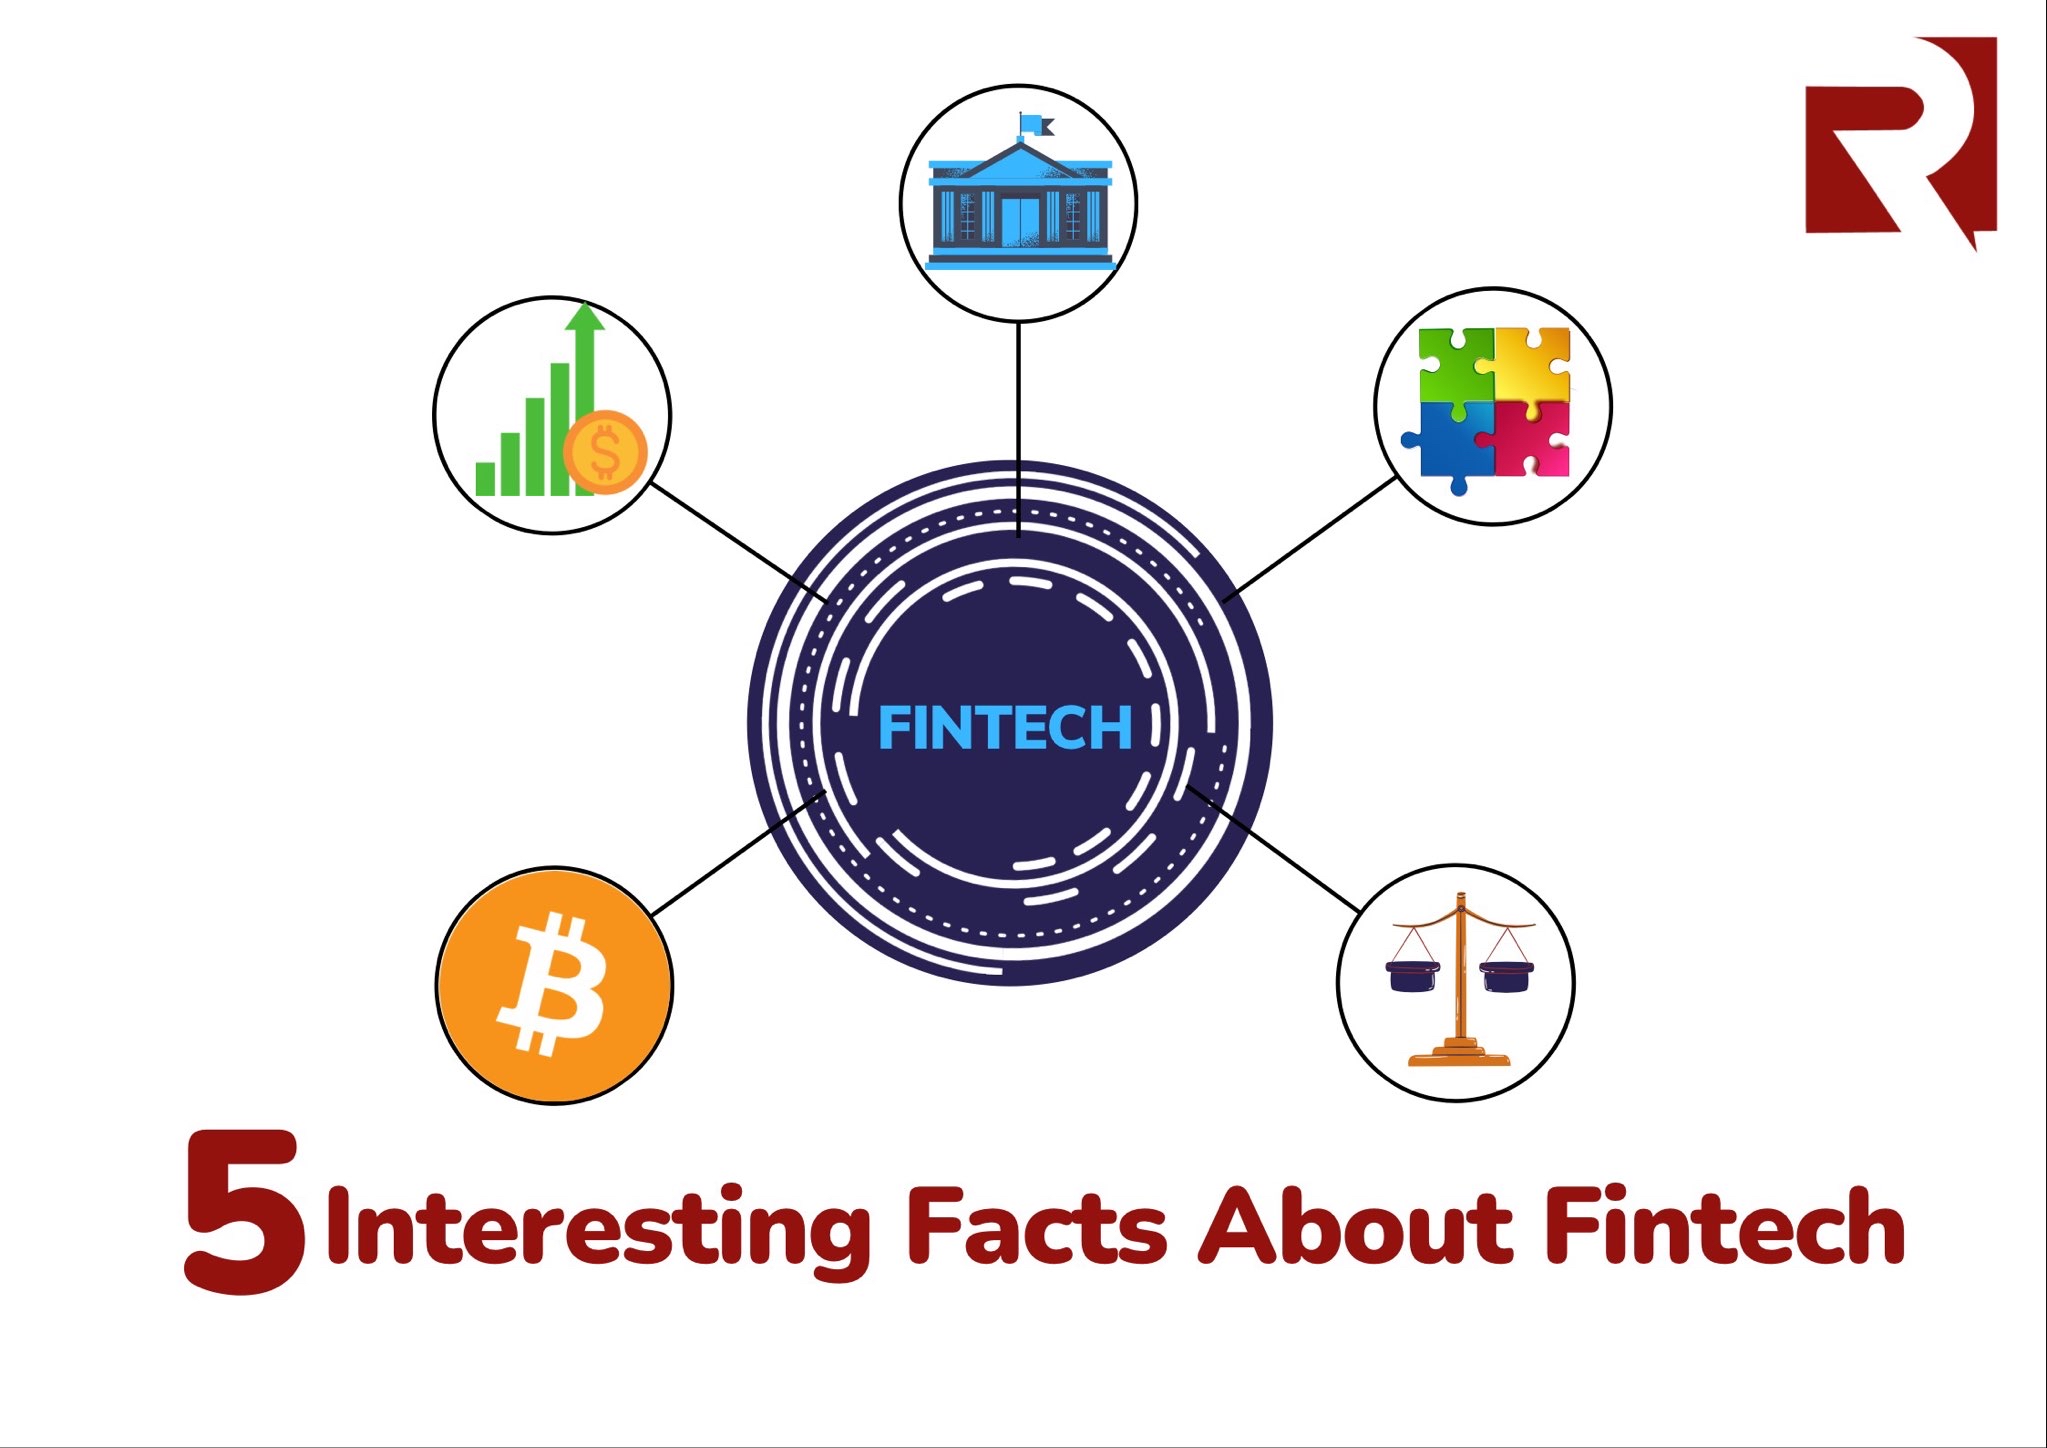 Five Interesting Facts About Fintech